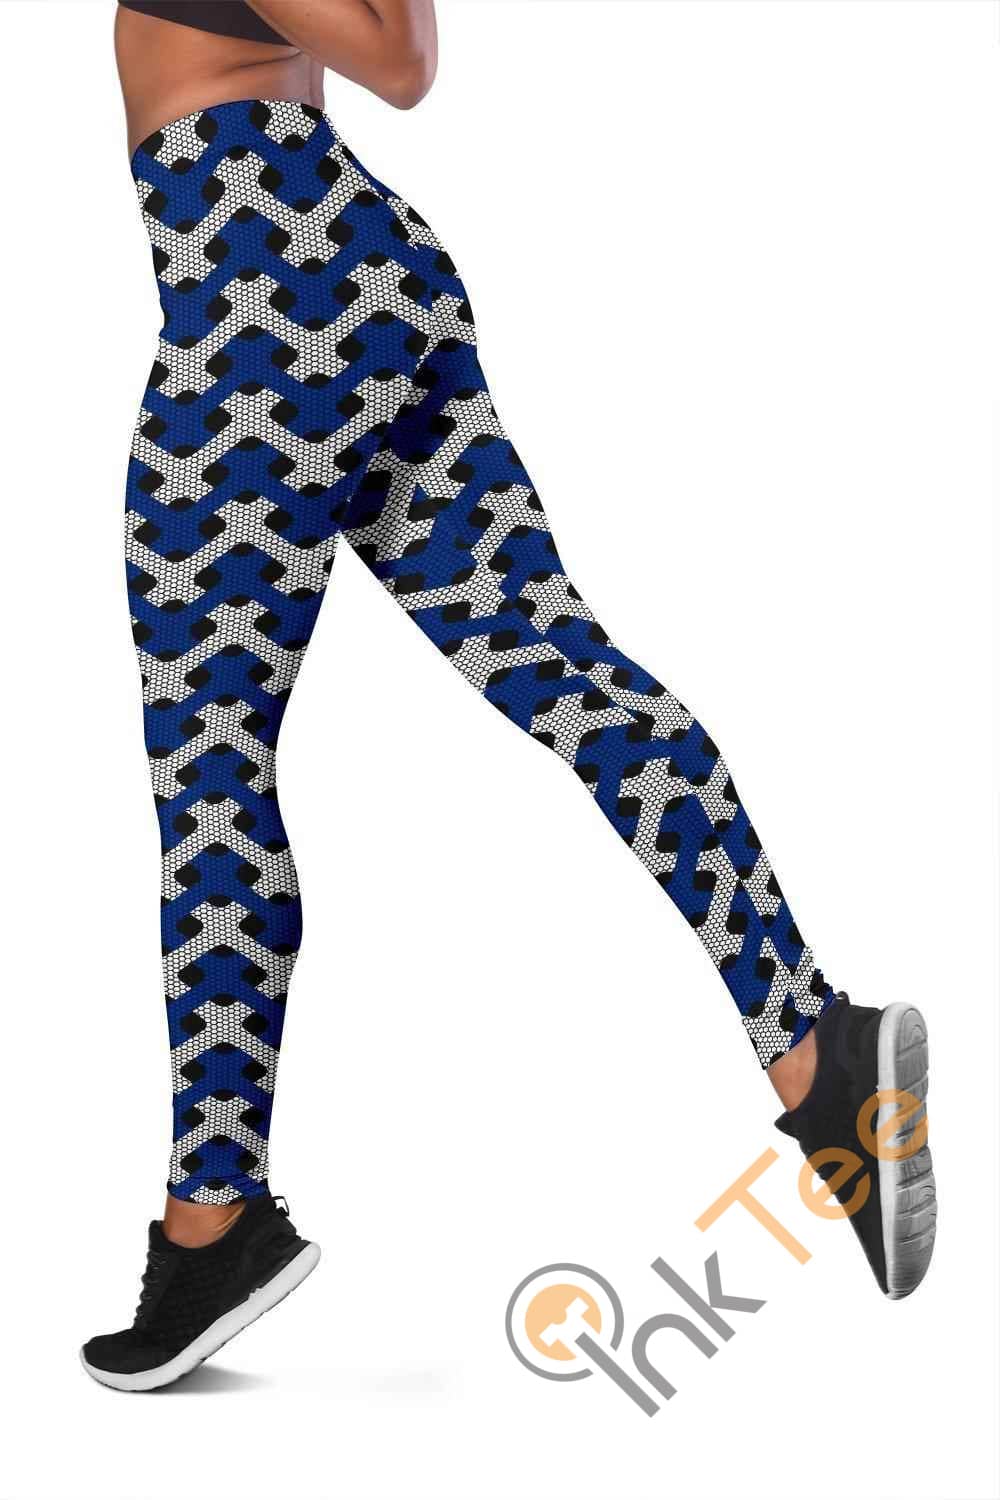 Inktee Store - Kentucky Wildcats Inspired 3D All Over Print For Yoga Fitness Fashion Women'S Leggings Image